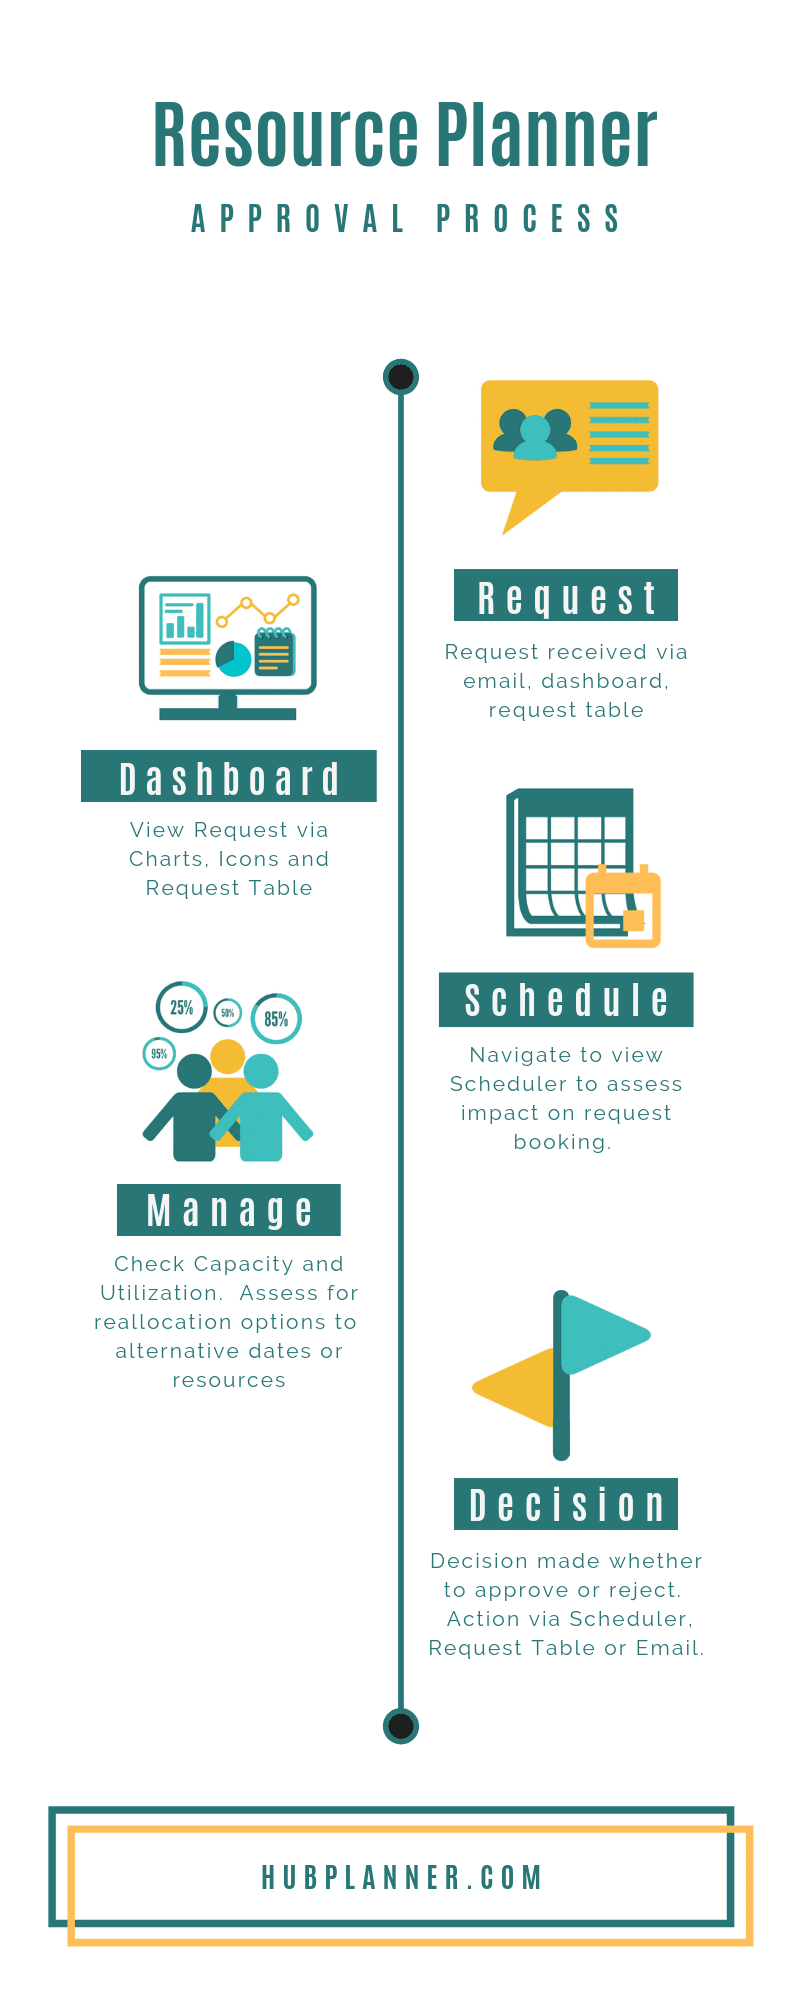 Request_Approval_Process_Infographic